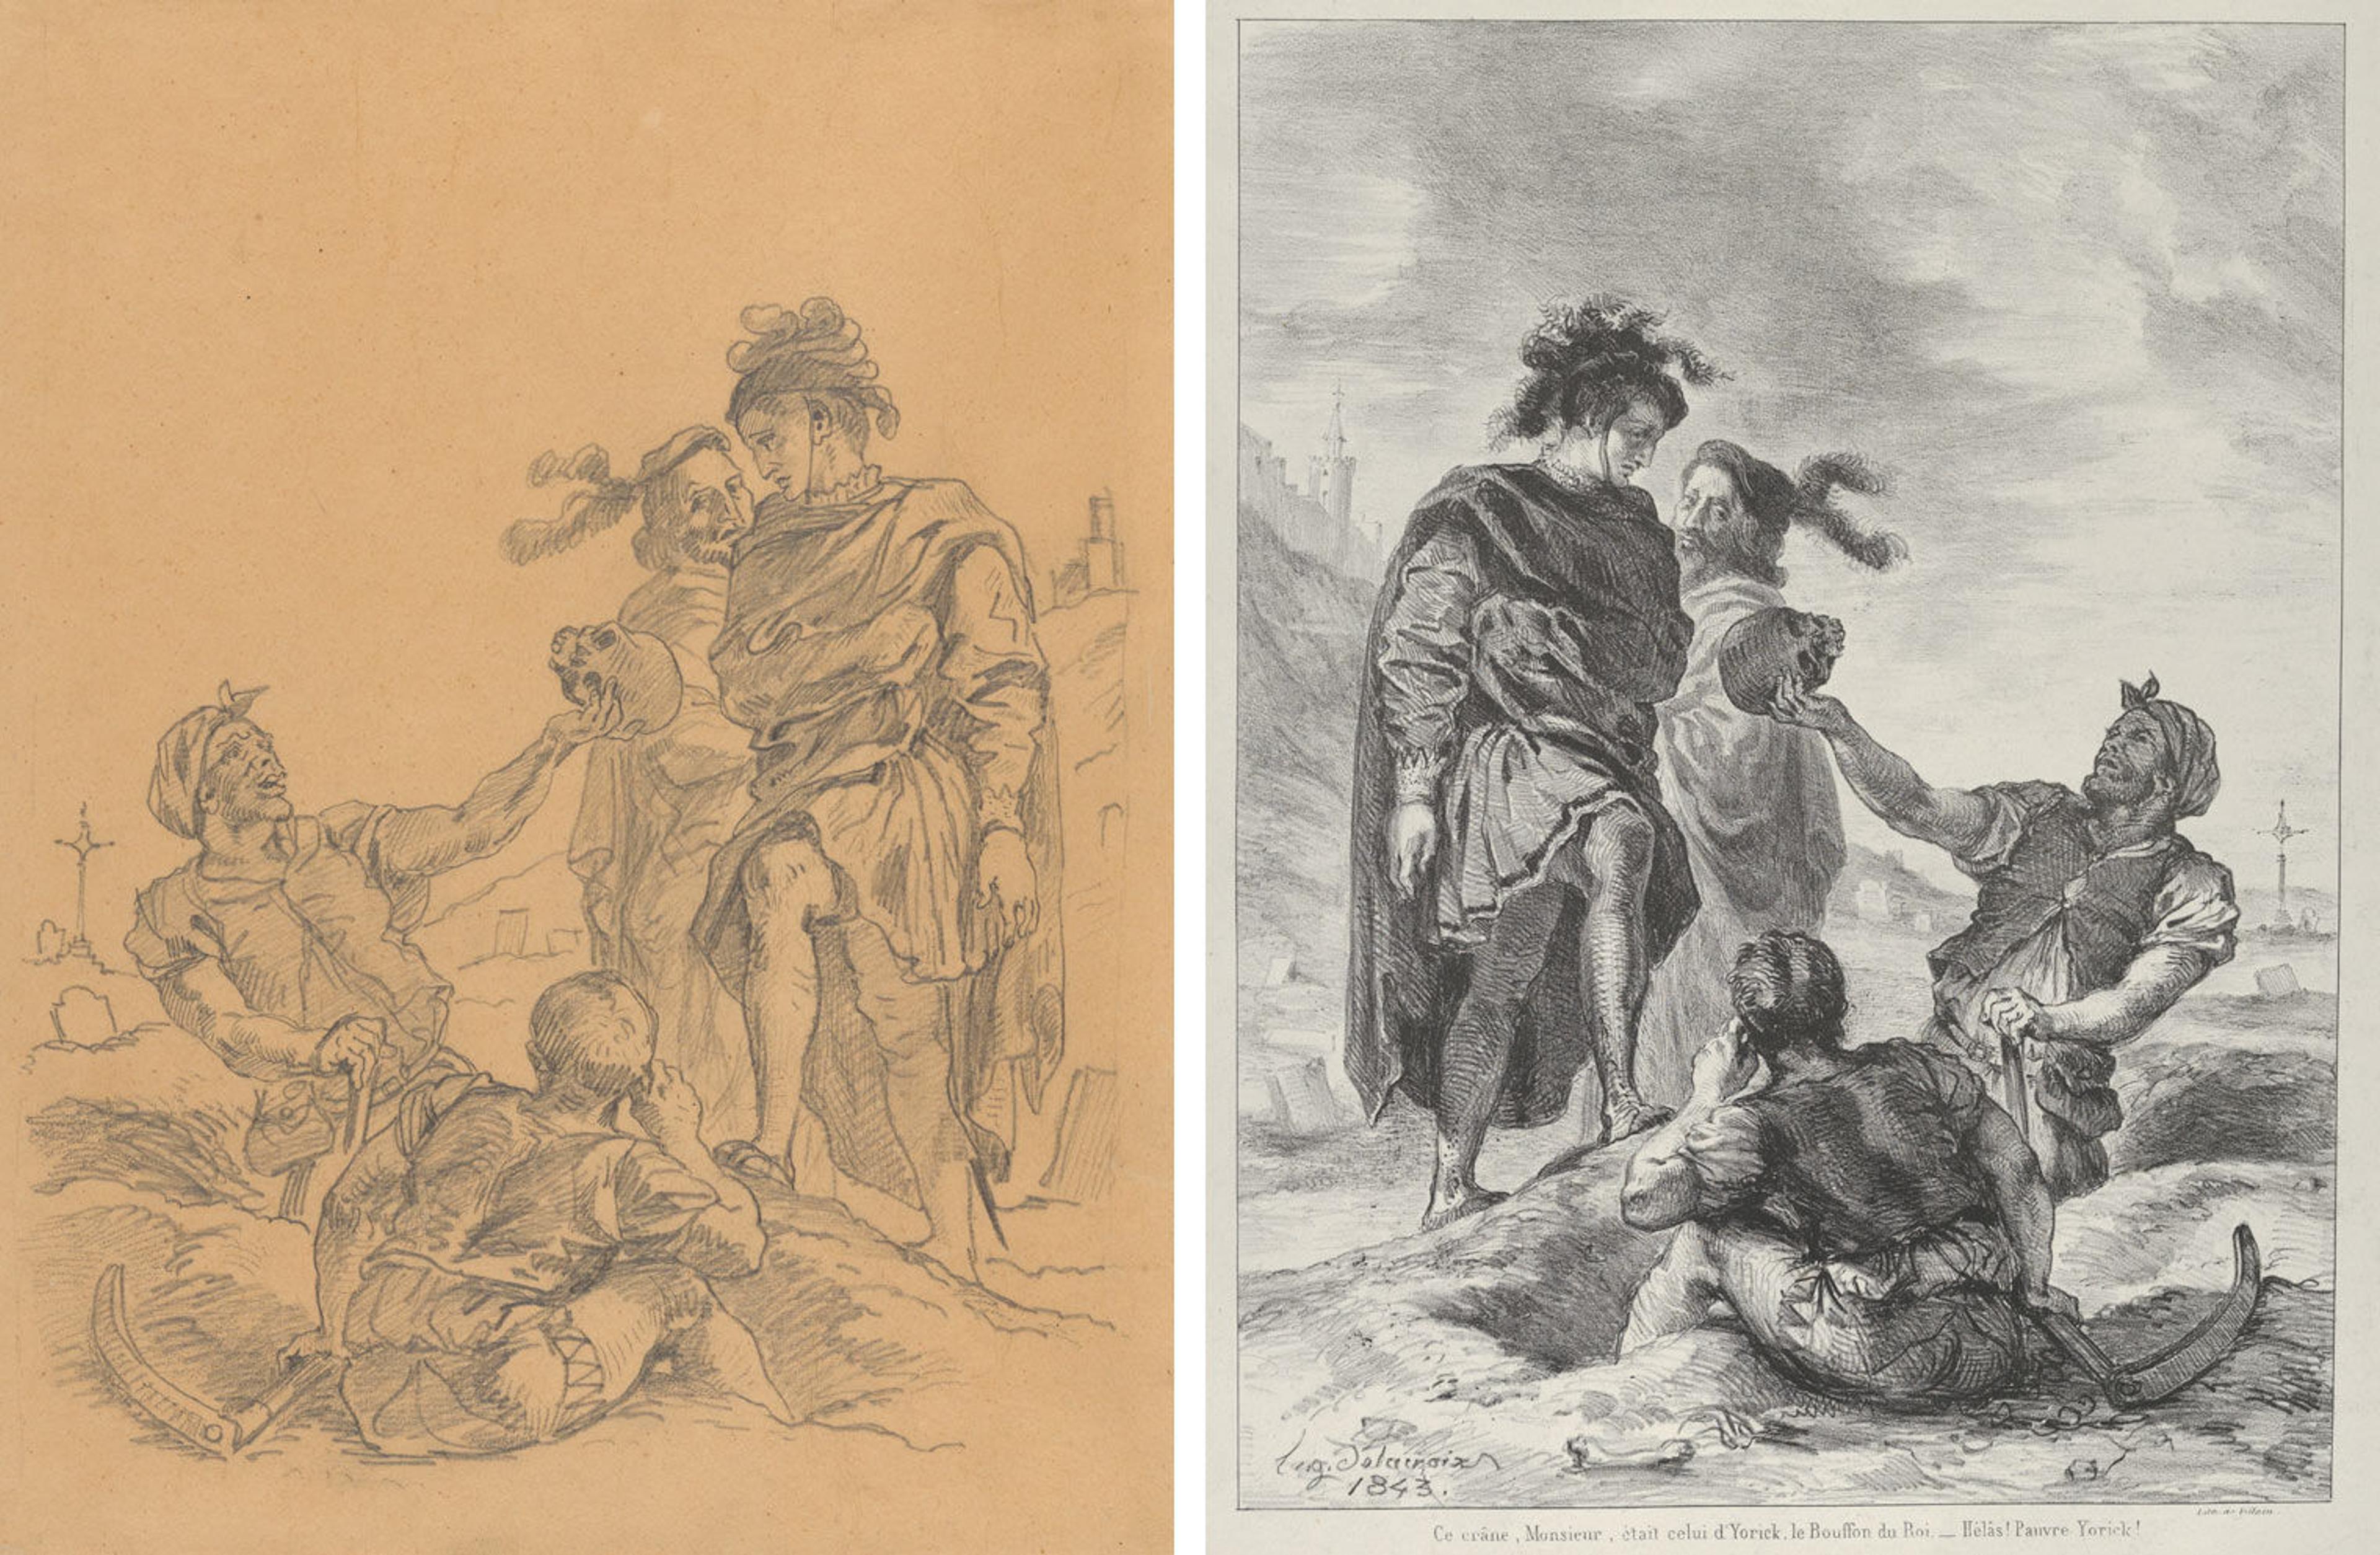 A drawing (left) and lithograph (right) by Eugene Delacroix depicting a scene in a graveyard from Shakespeare's Hamlet